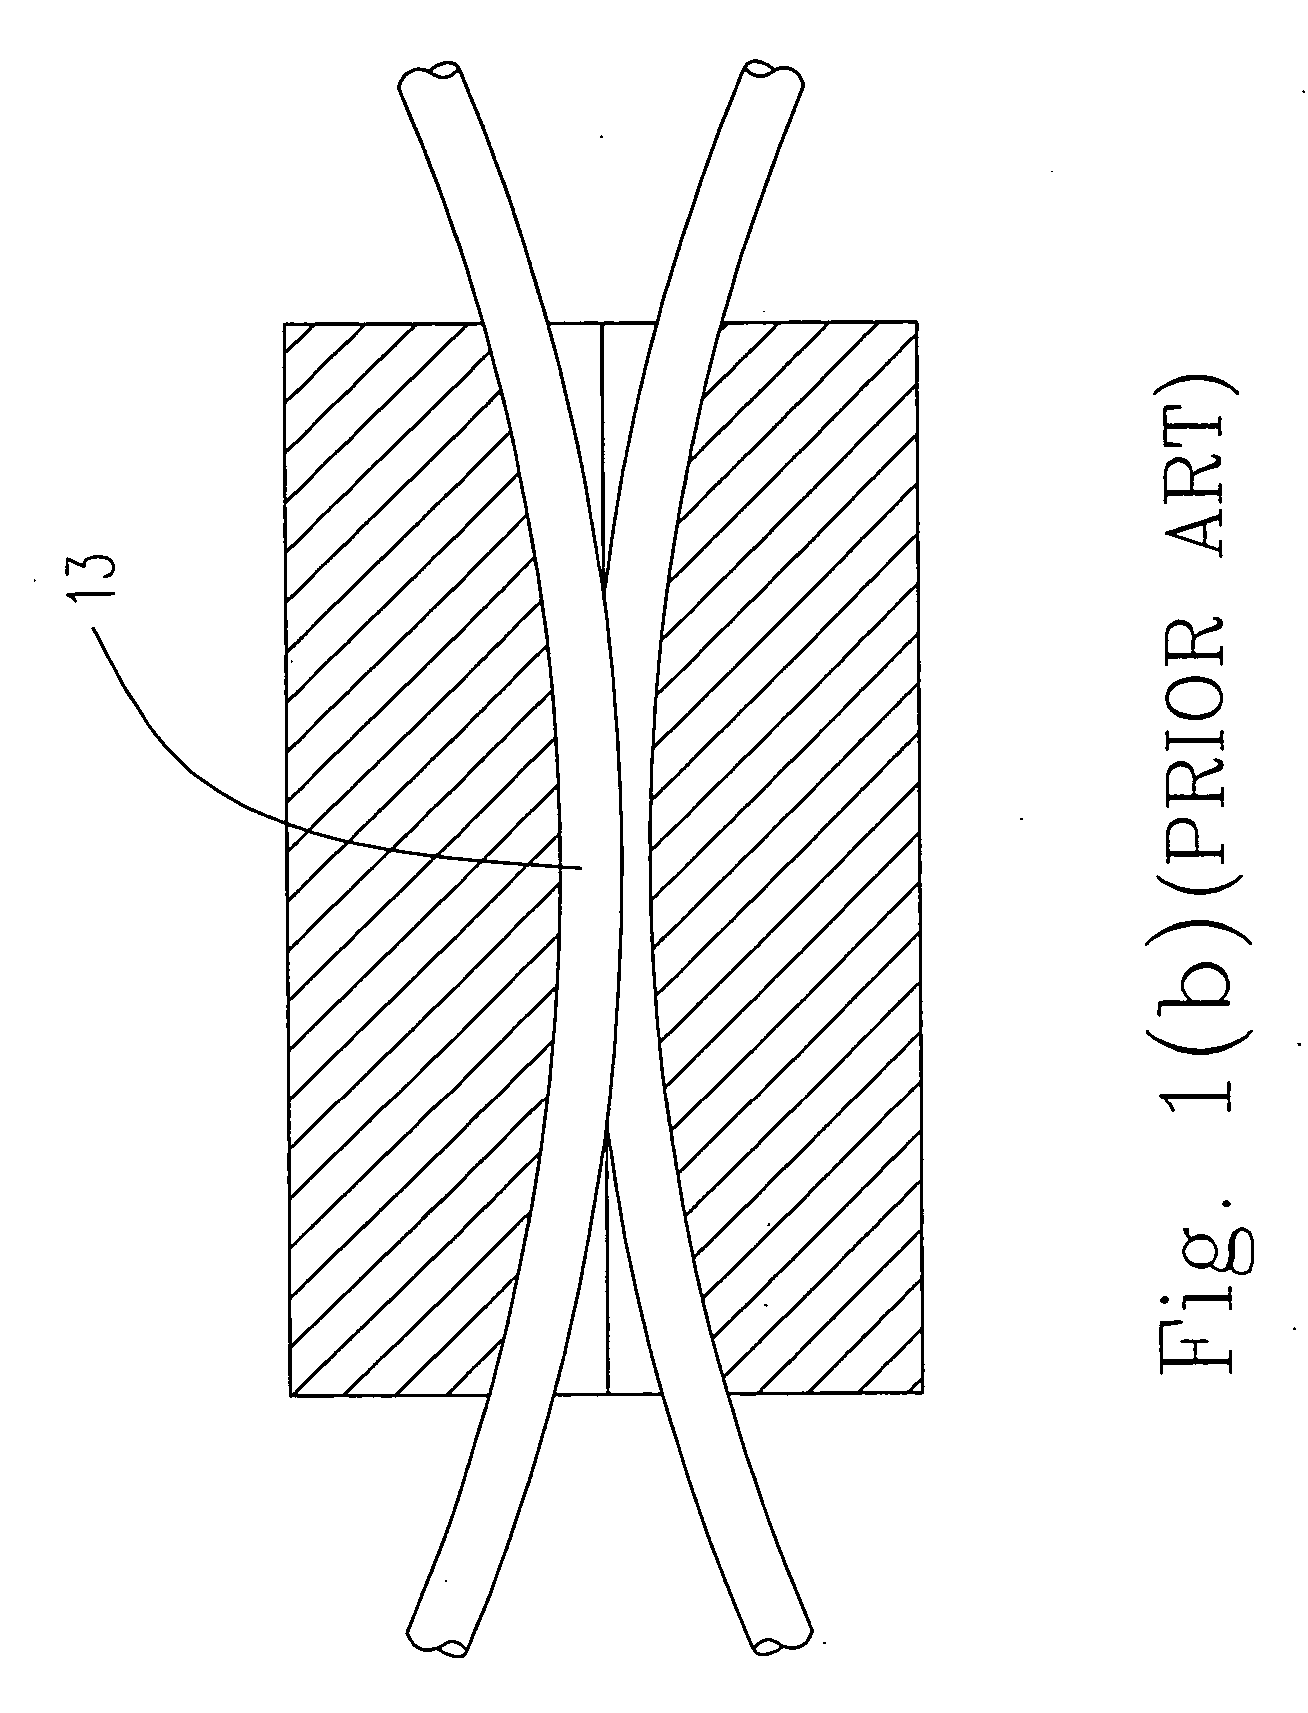 Laser-ablated fiber devices and method of manufacturing the same